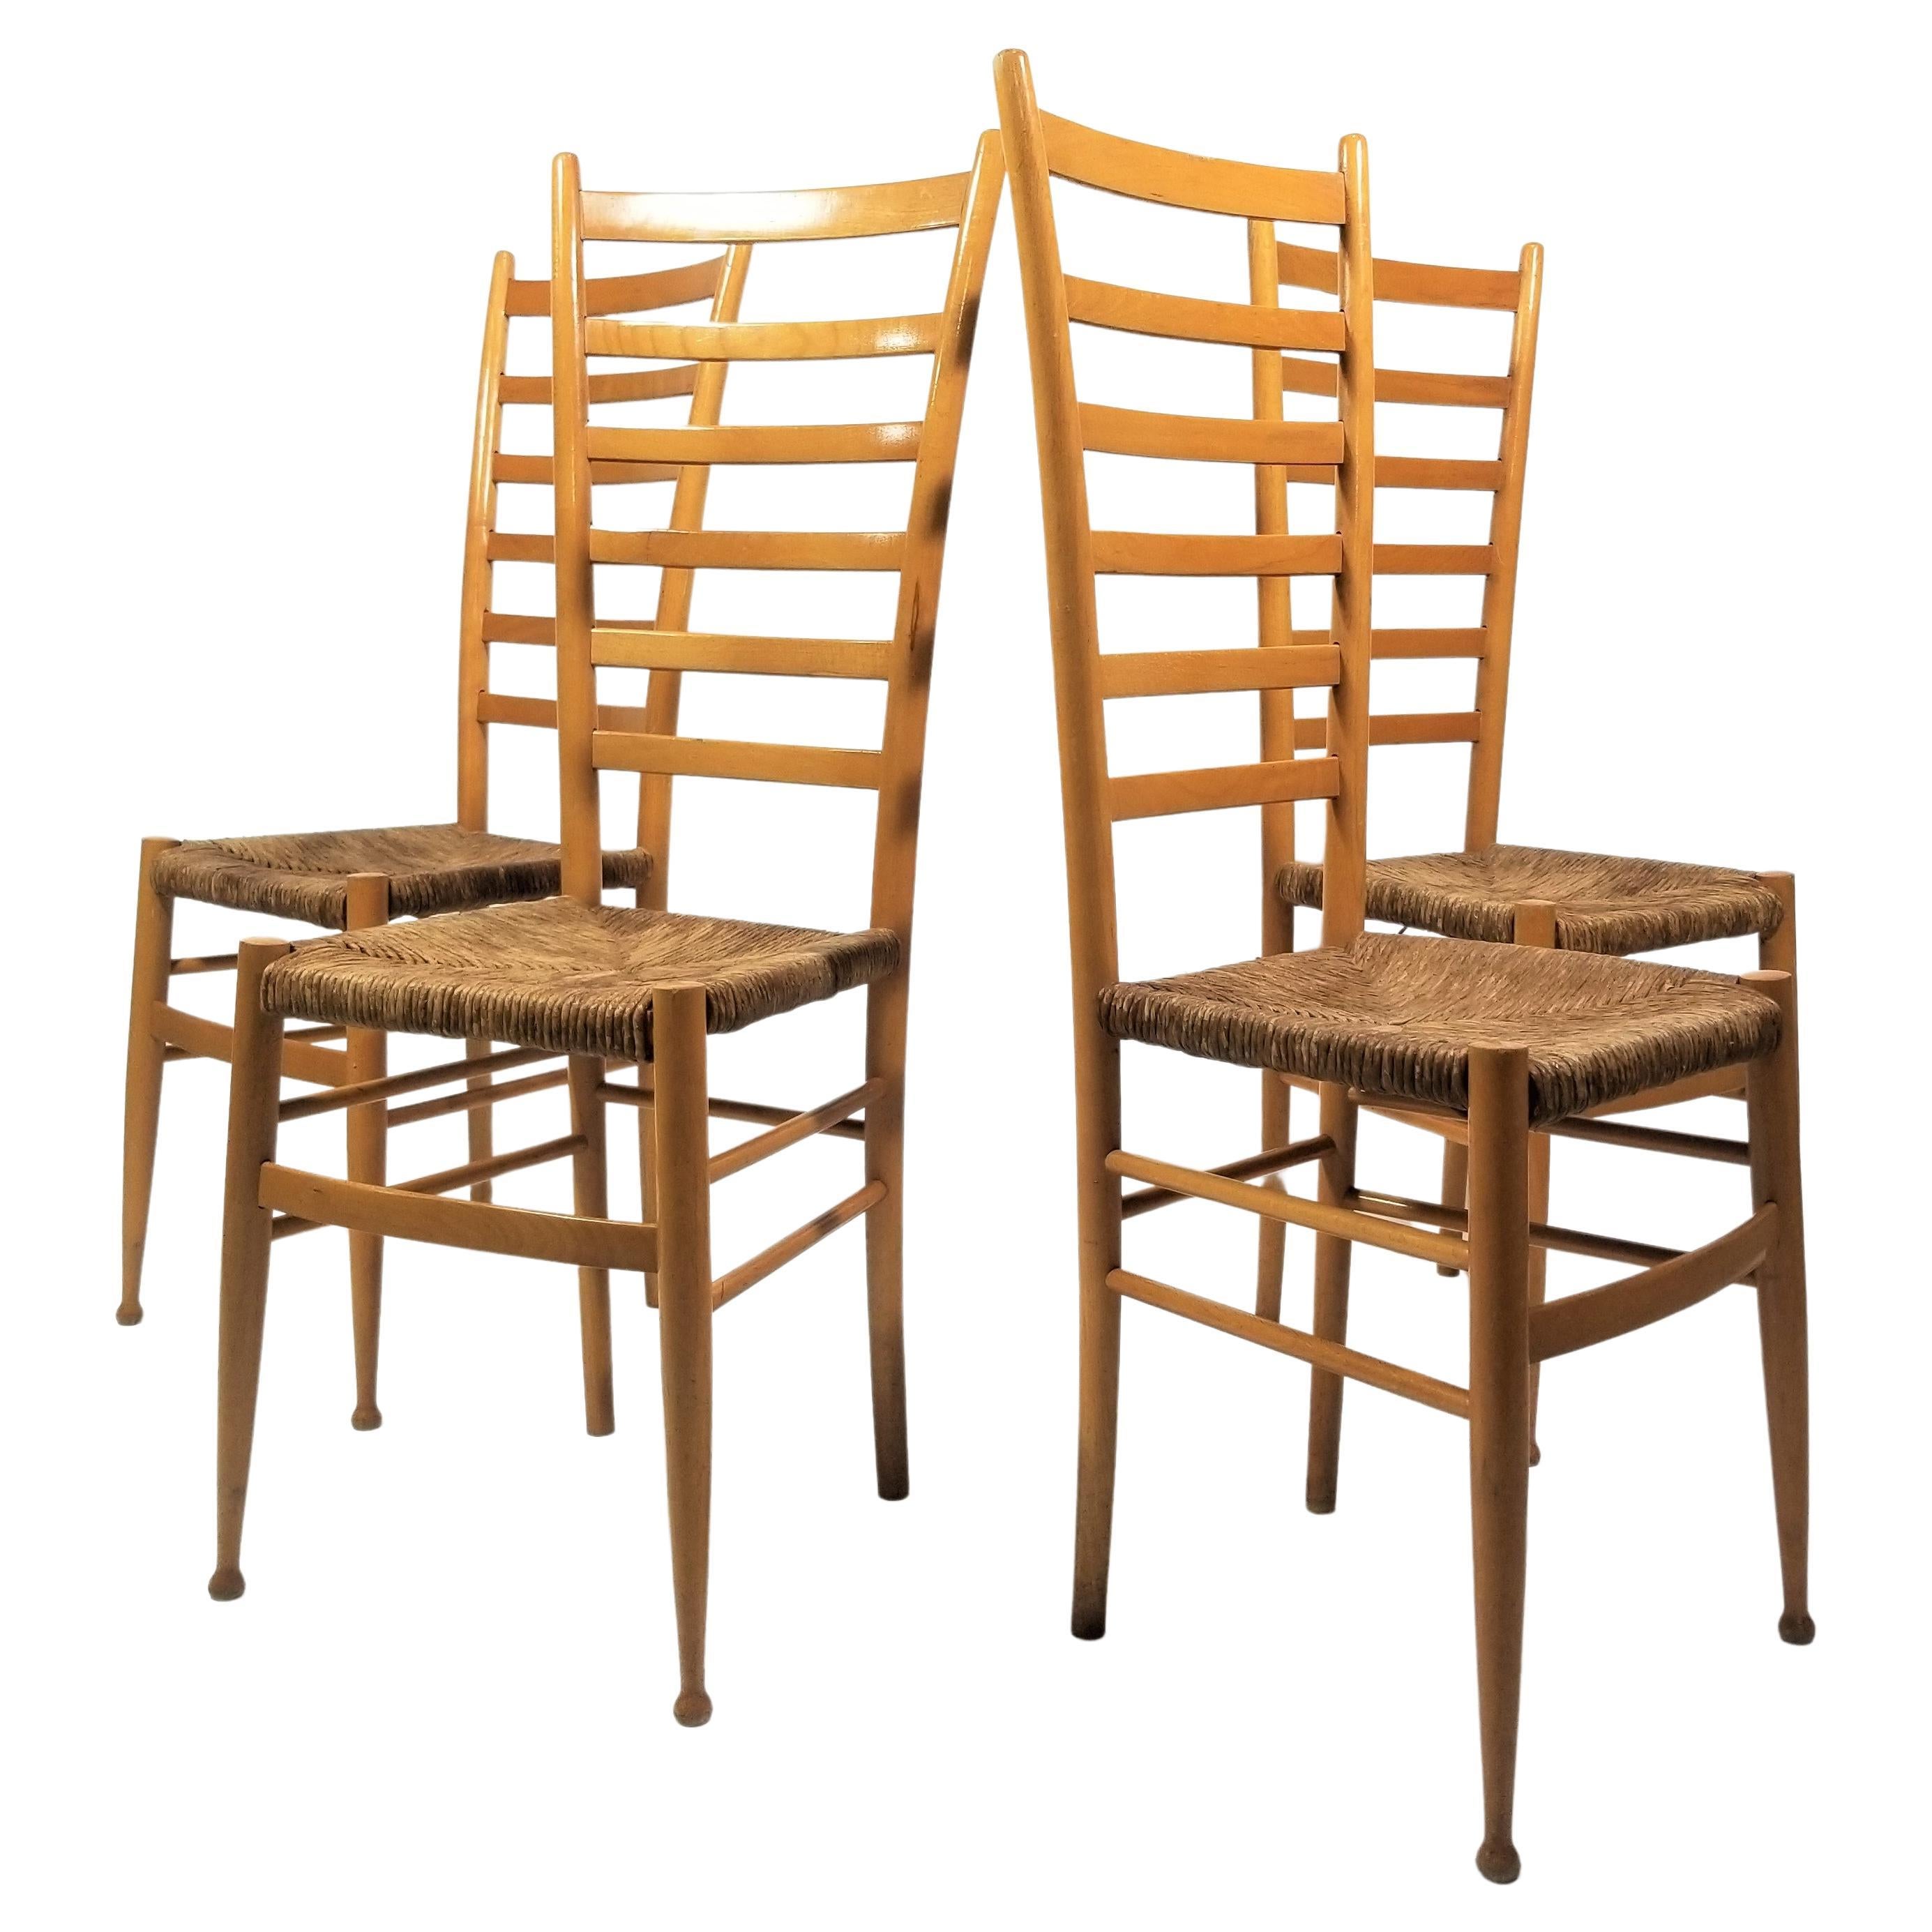 Italian Gio  Ponti Style Tall Ladder Back Chairs 1970s Made in Italy  For Sale